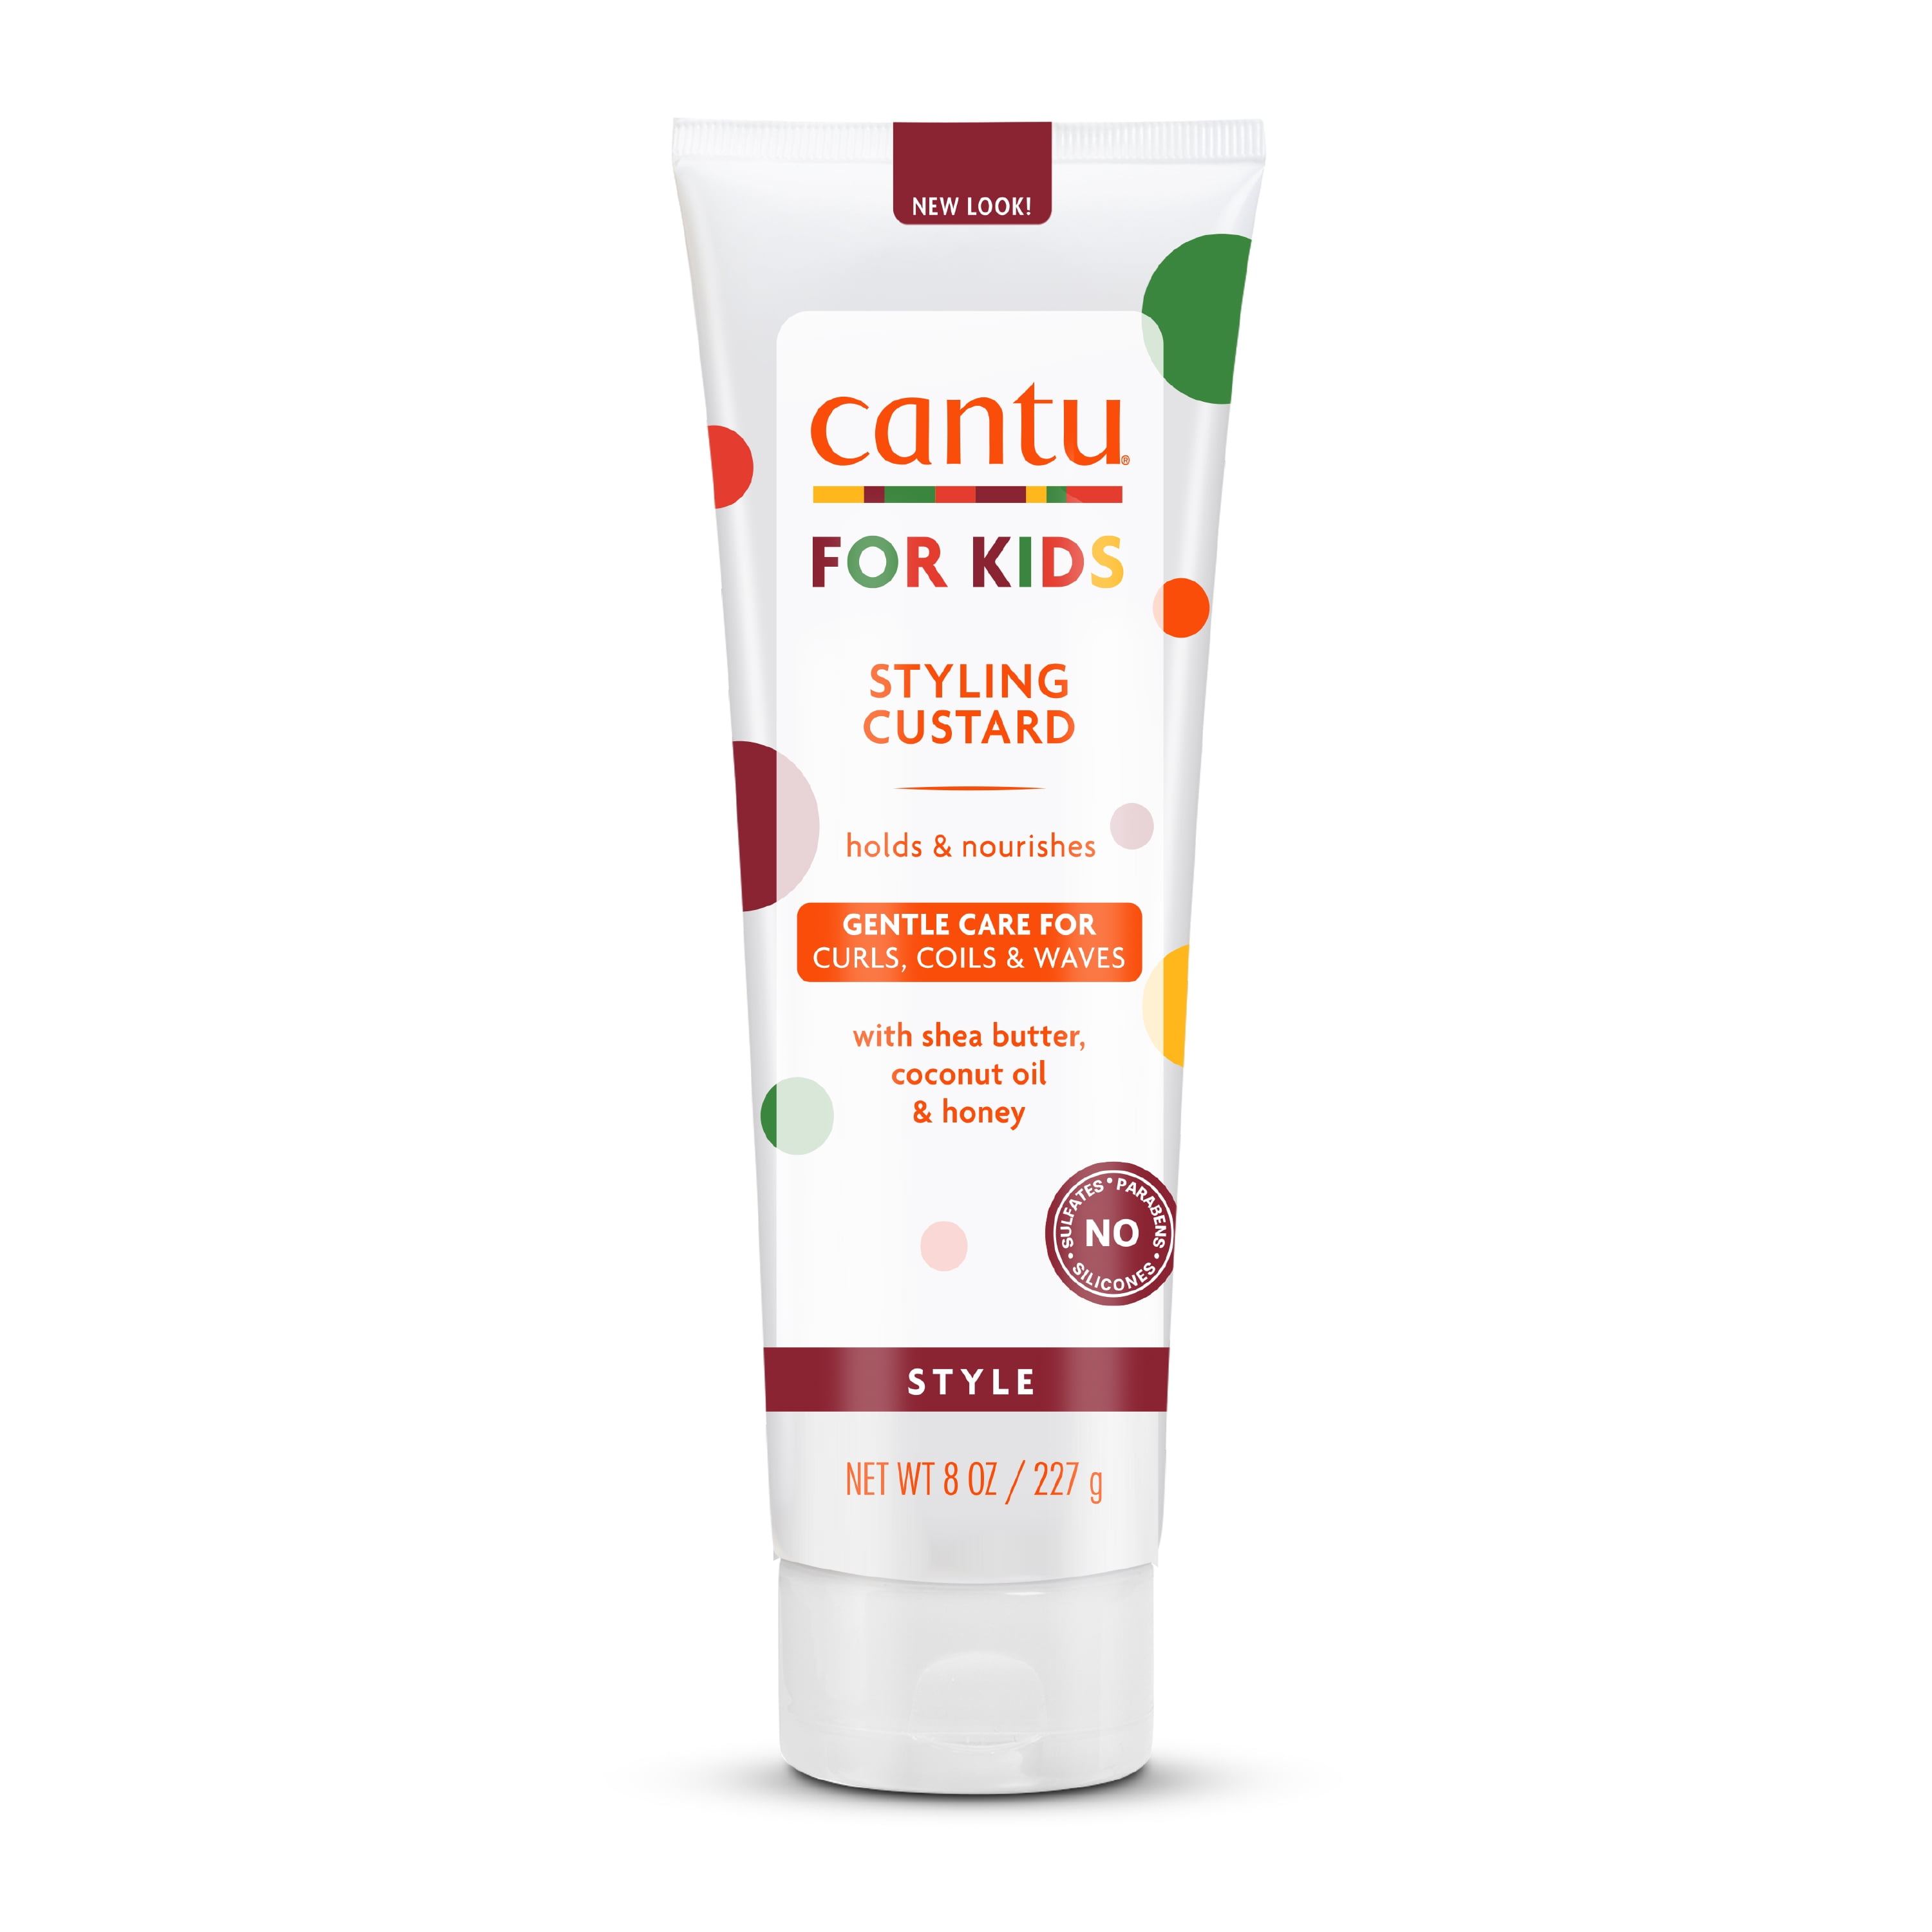 Cantu Care for Kids Sulfate-Free Styling Custard with Shea Butter, 8 fl oz